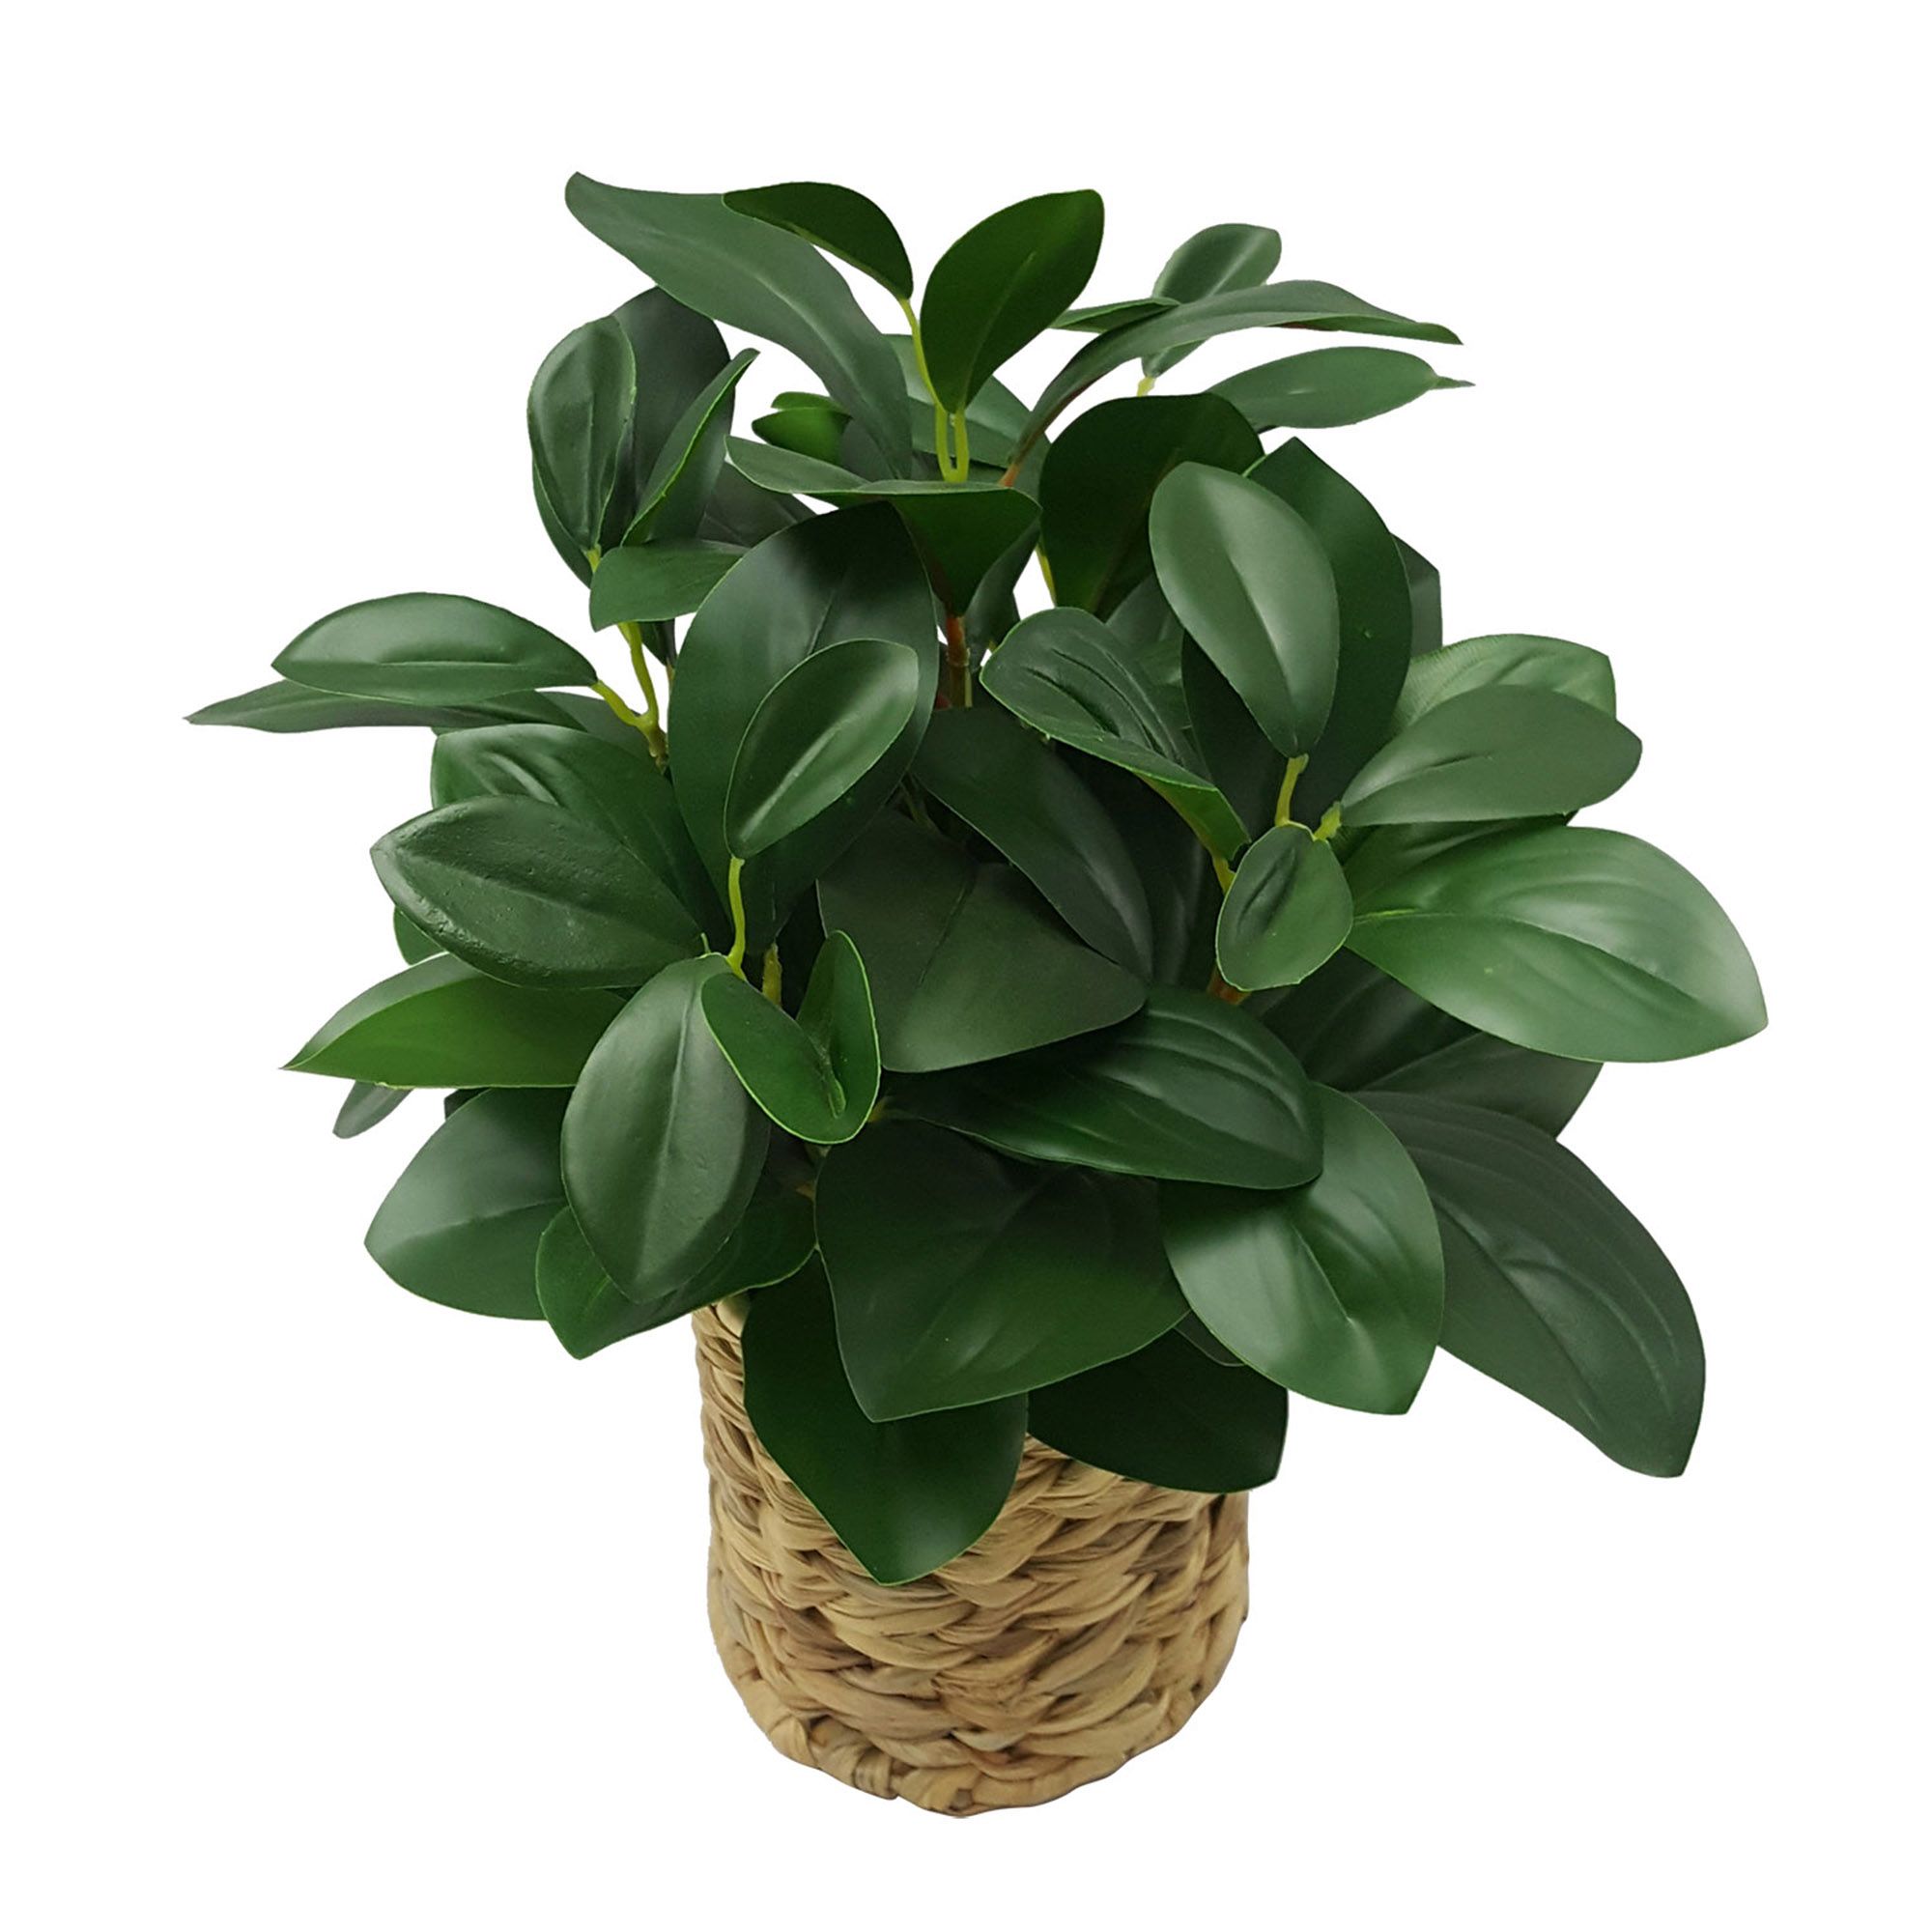 Better Homes & Gardens 13" Artificial Peperomia Plant in Natural Wicker Basket - image 2 of 5